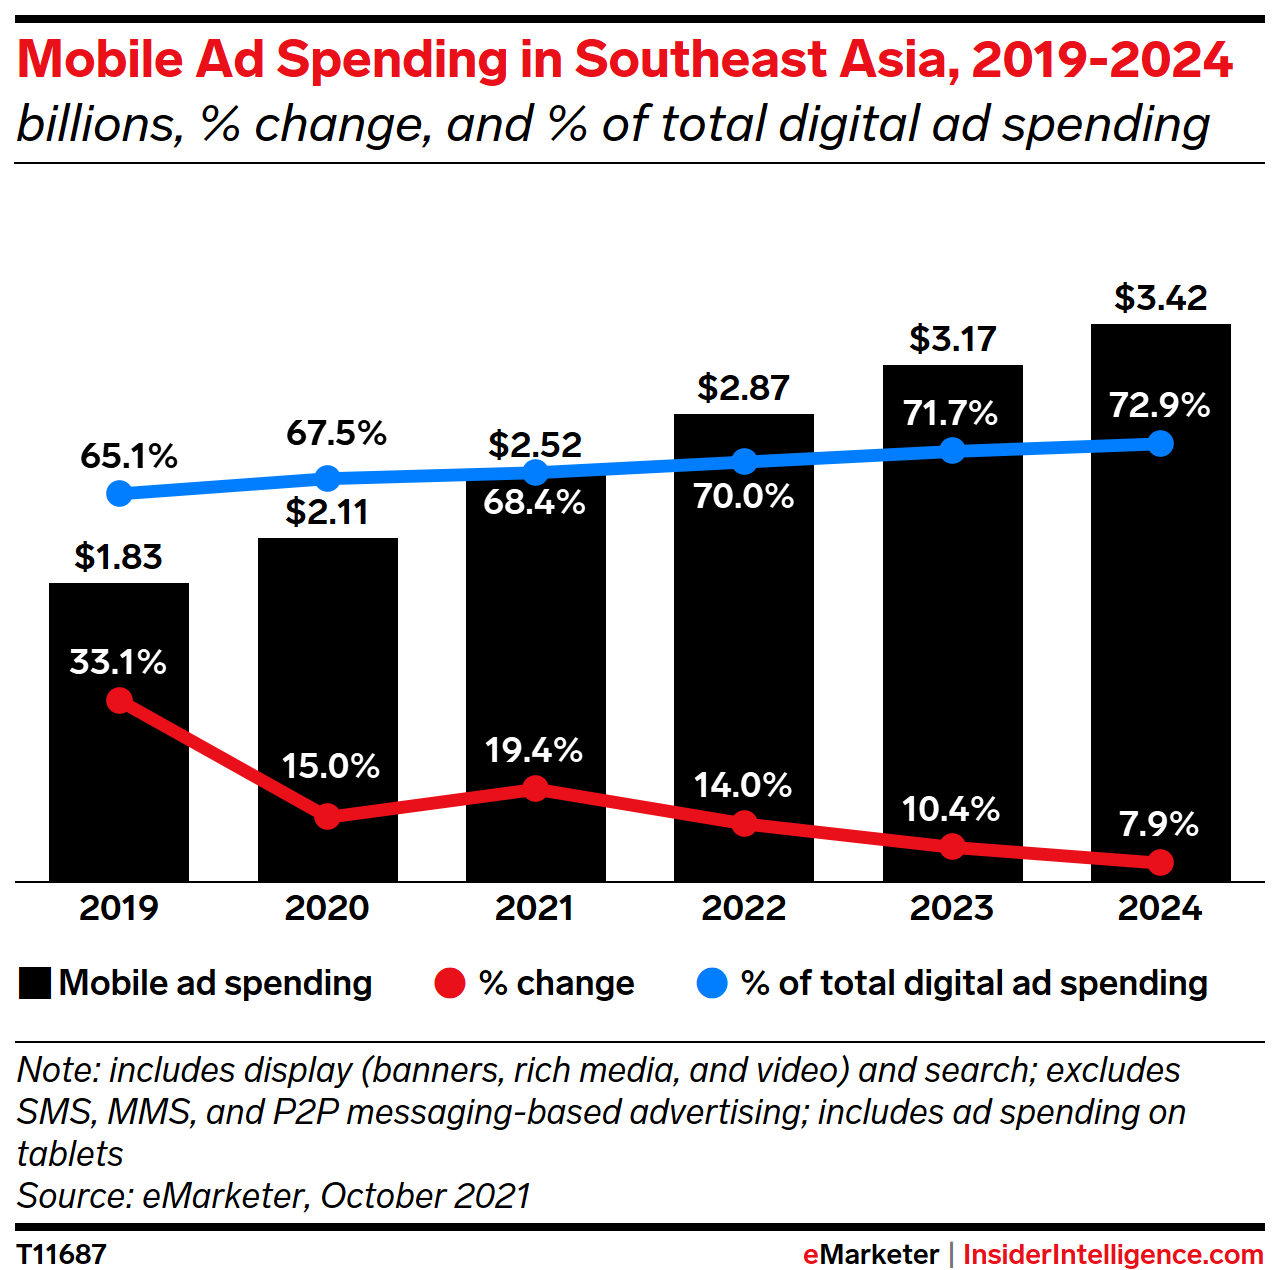 Mobile Ad Spending in Southeast Asia, 2019-2024 (billions, % change, and % of total digital ad spending)